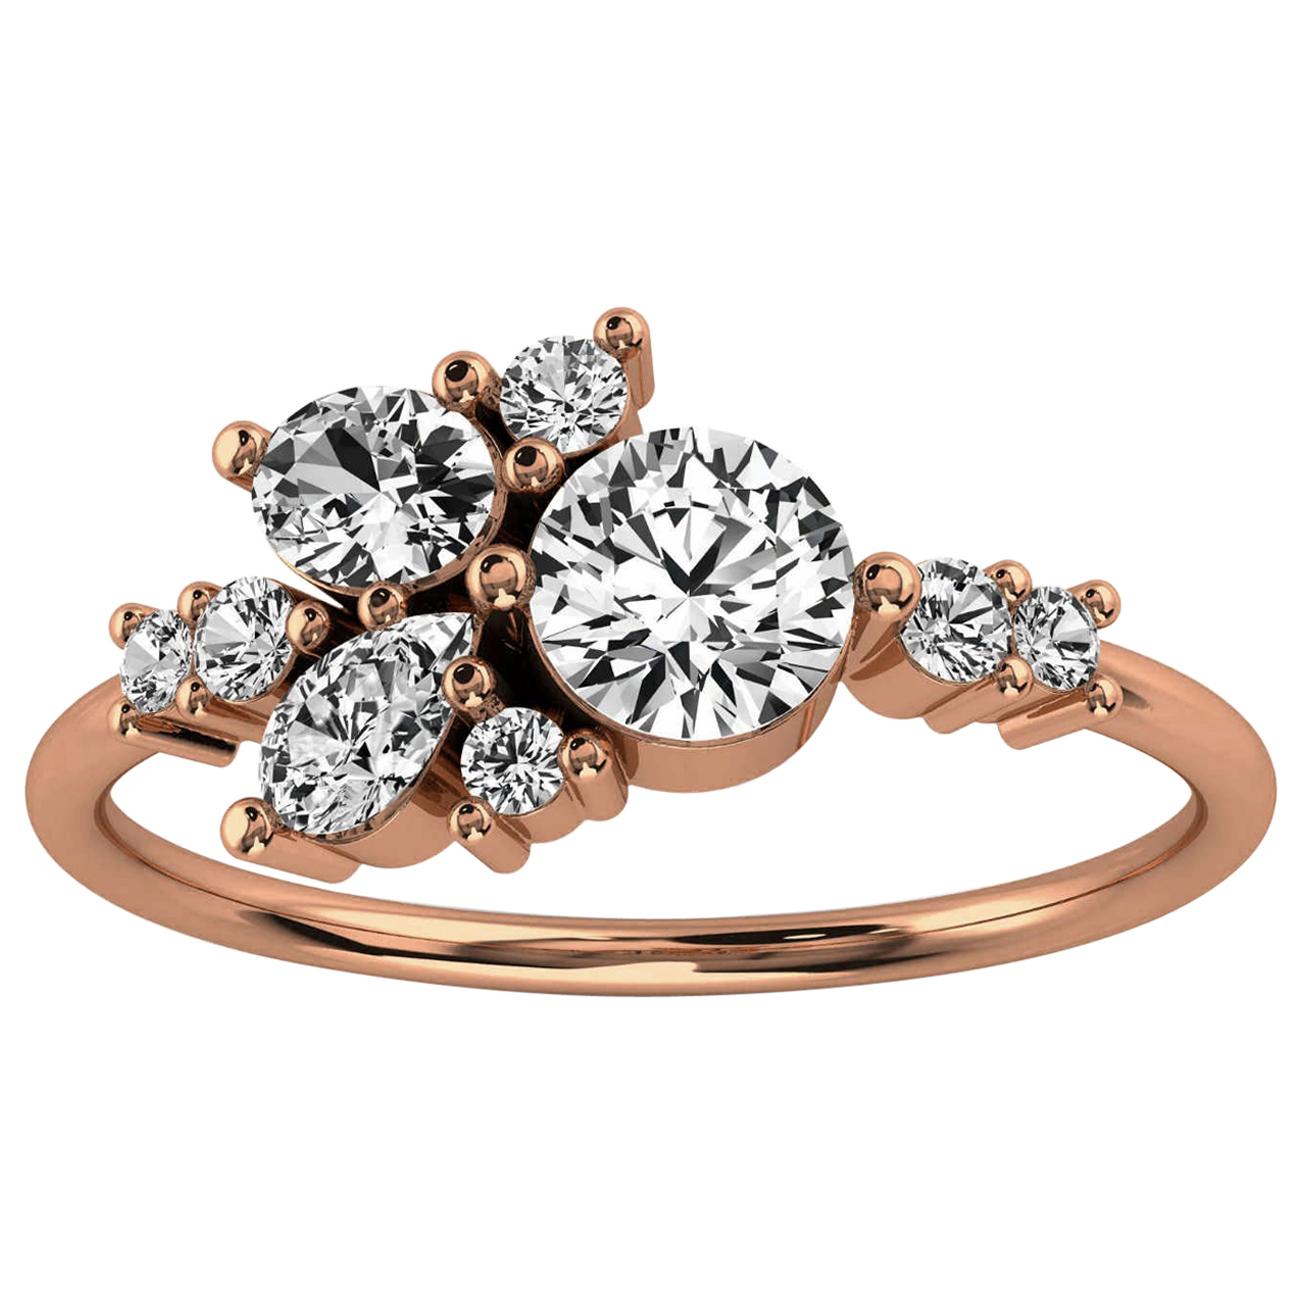 14K Rose Gold Tima Delicate Scattered Organic Design Diamond Ring '3/4 Ct. Tw' For Sale